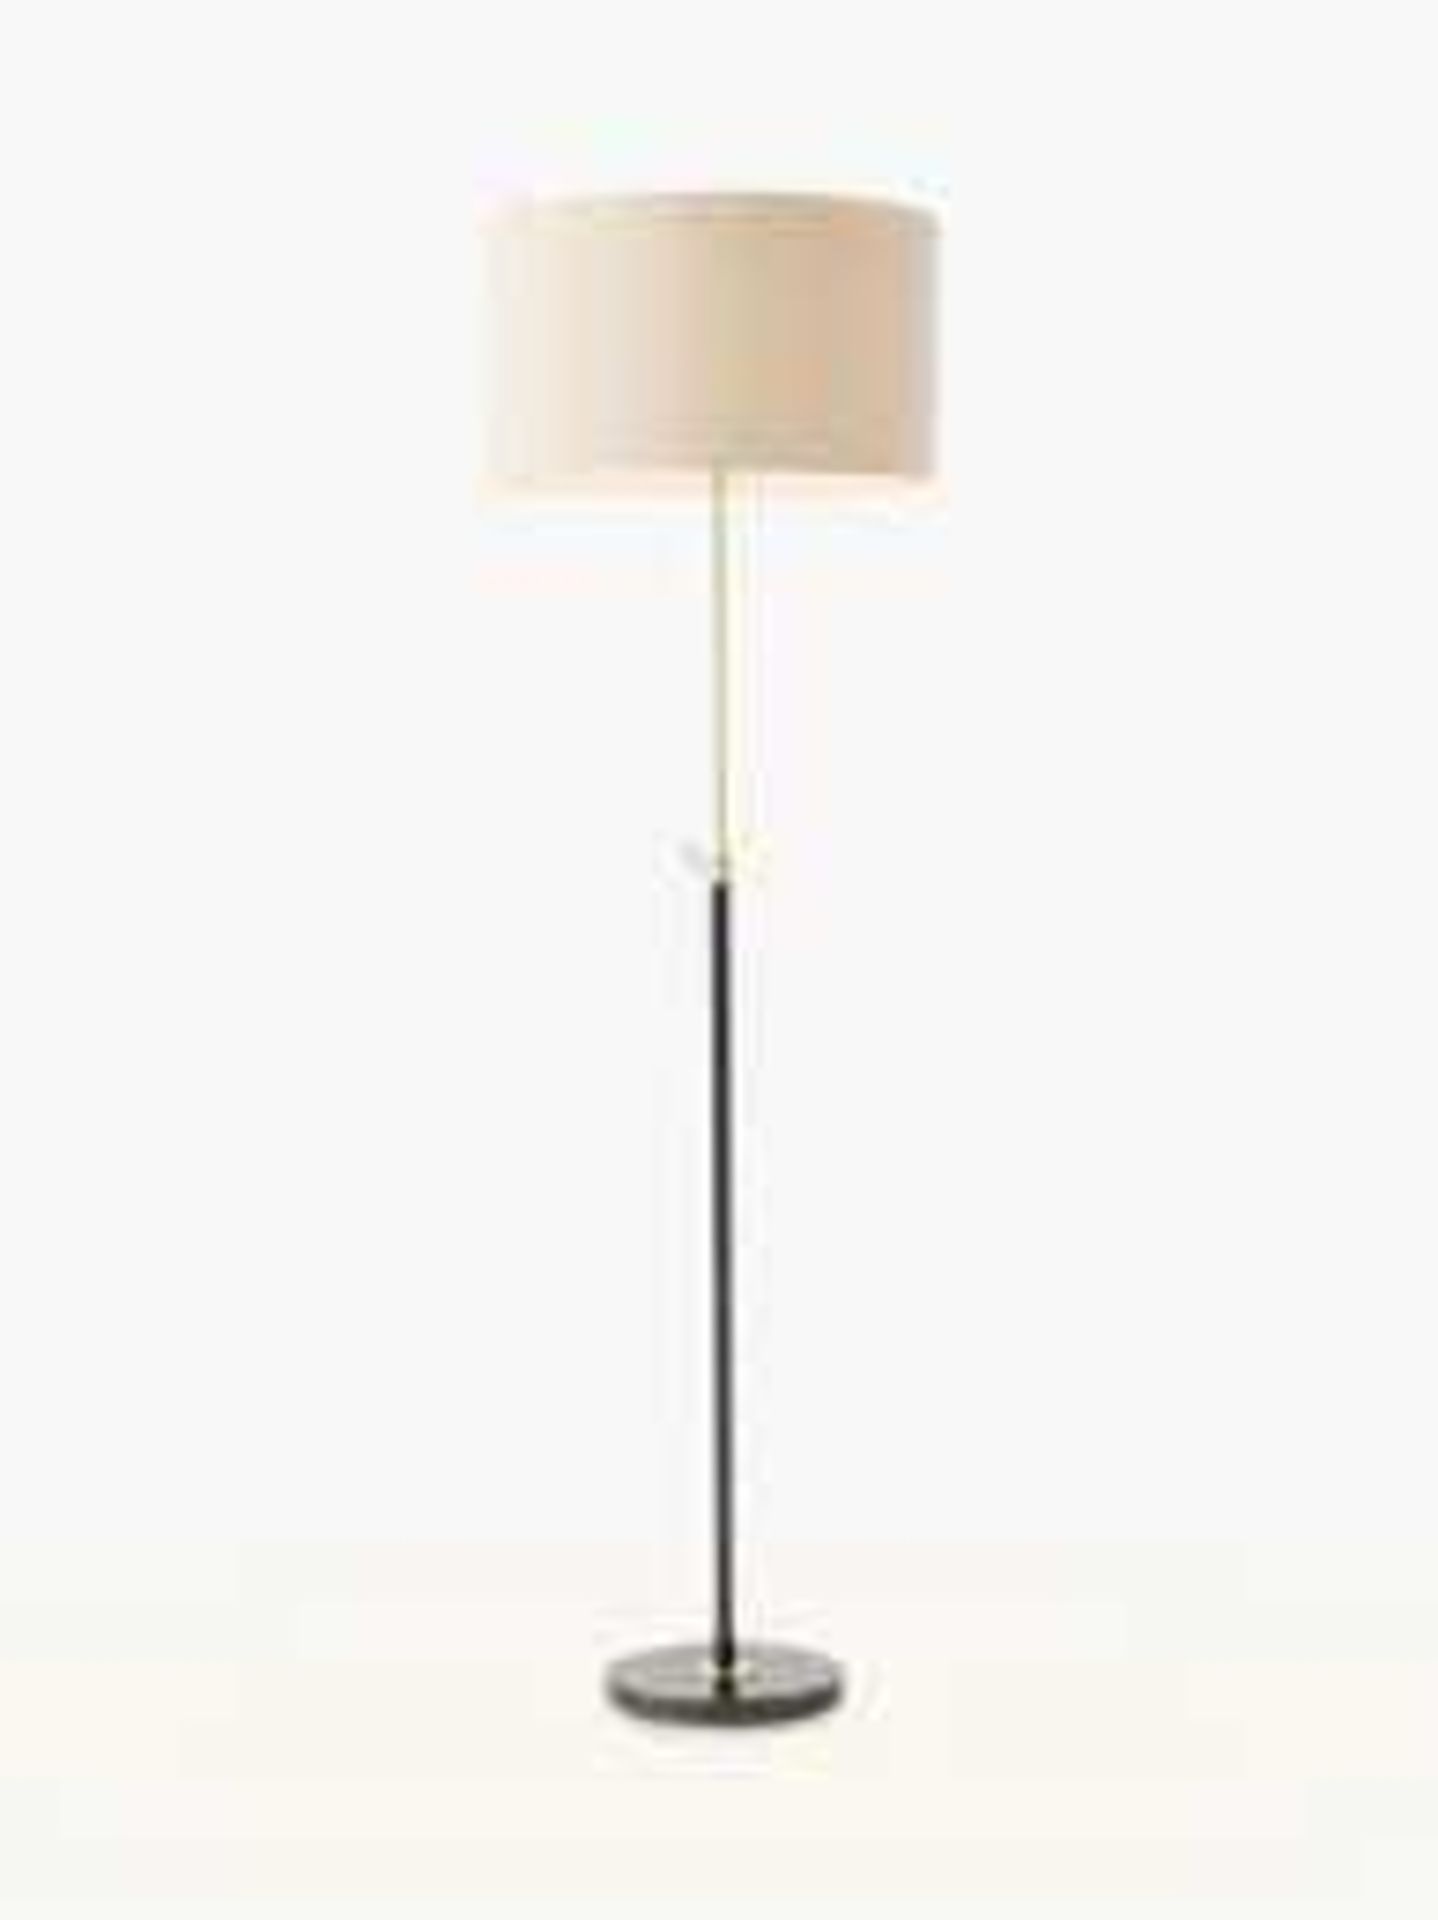 (Jb) RRP £280 Lot To Contain 1 Unpackaged West Elm Telescoping Adjustable Floor Lamp (Base Only)